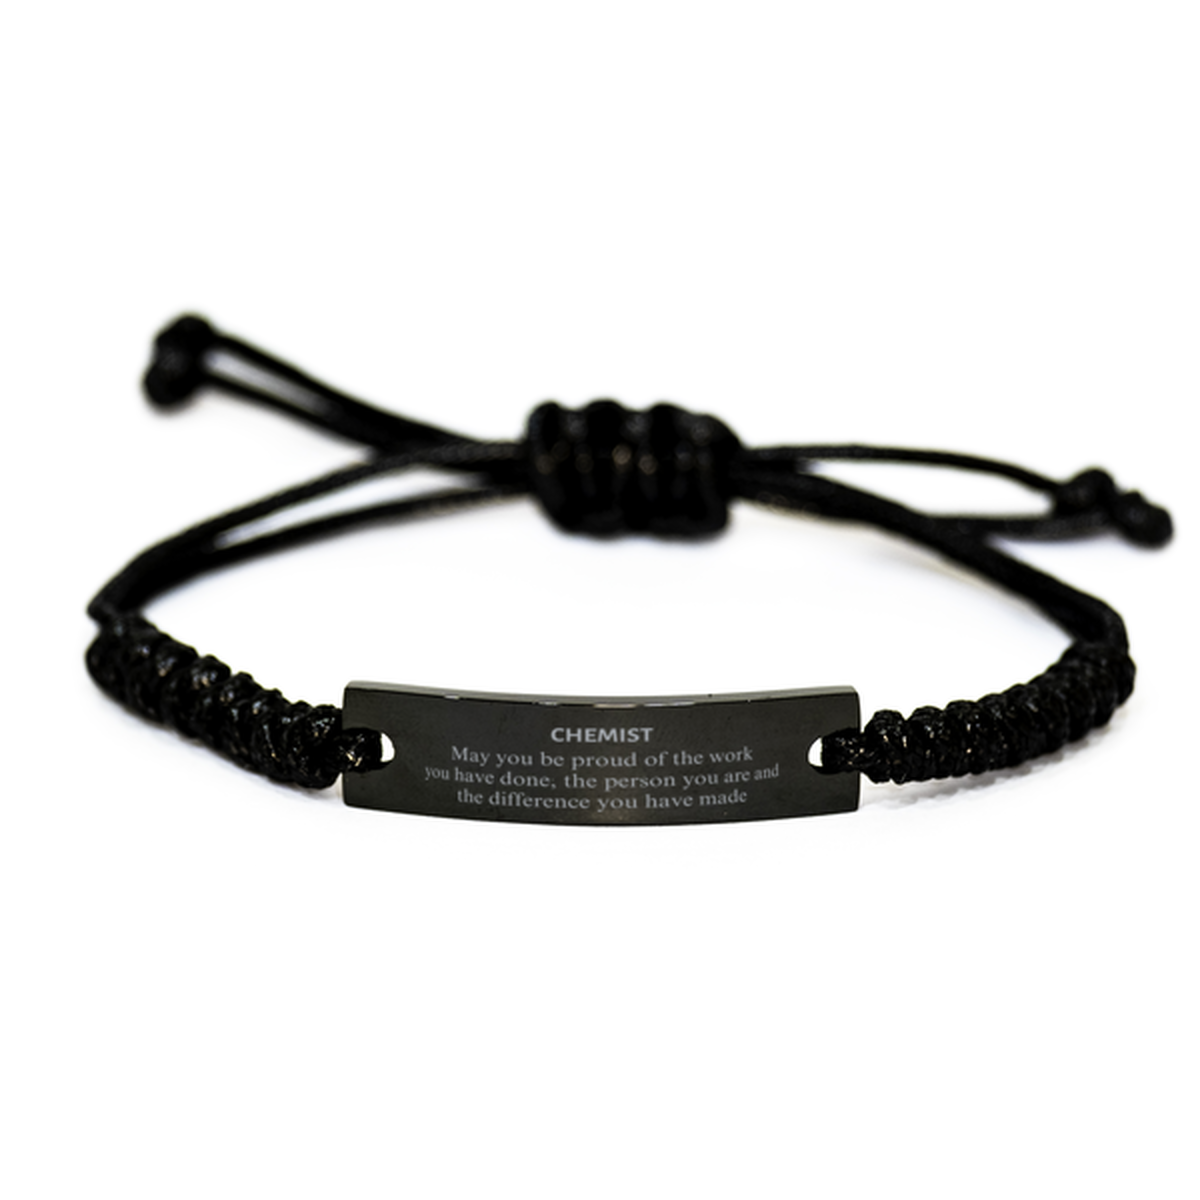 Chemist May you be proud of the work you have done, Retirement Chemist Black Rope Bracelet for Colleague Appreciation Gifts Amazing for Chemist